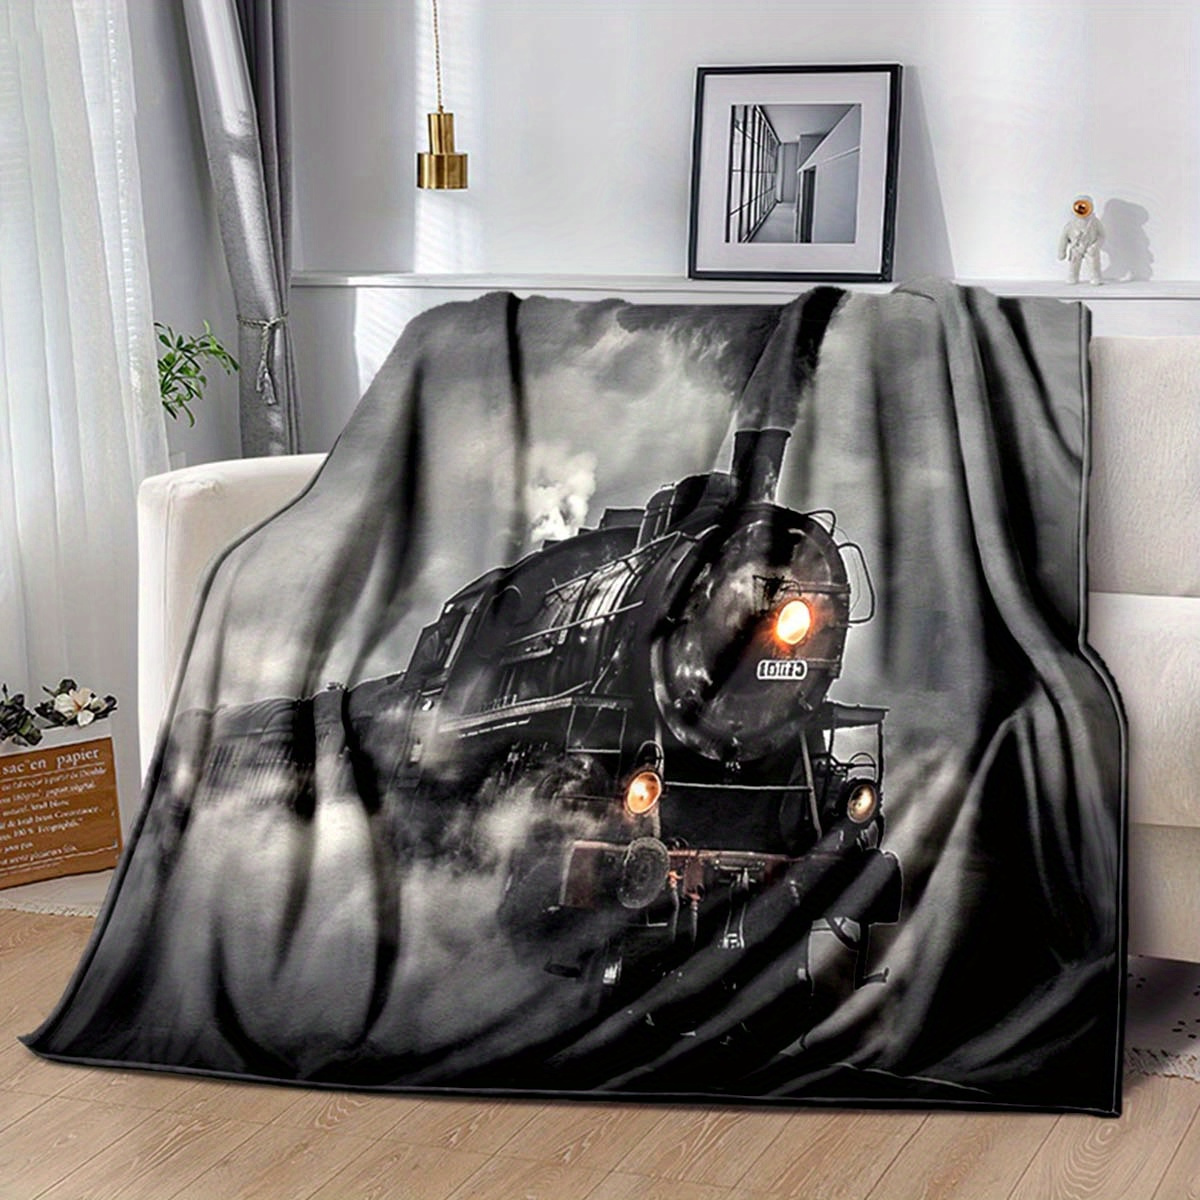 

1pc Cozy Retro Steam Train Printed Blanket - Lightweight Flannel Throw For Sofa, Bed, Travel, Camping, Living Room, Couch, Digital Printing Fleece Blanket, Gifts For Family